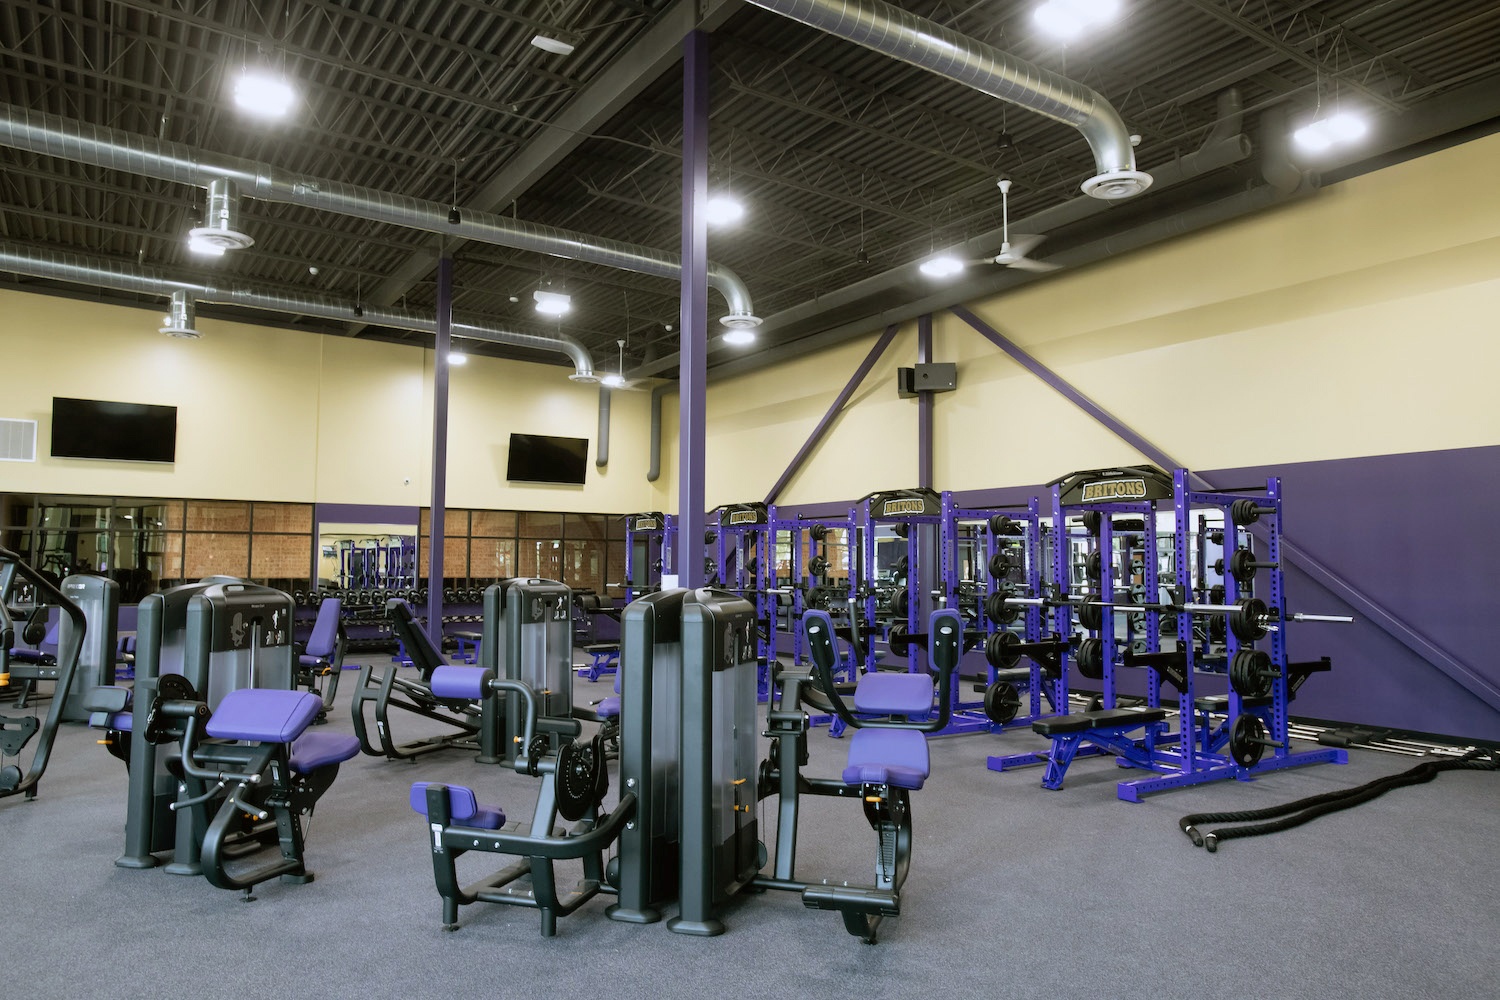 An array of purple exercise machines in the expanded Serra Fitness Center